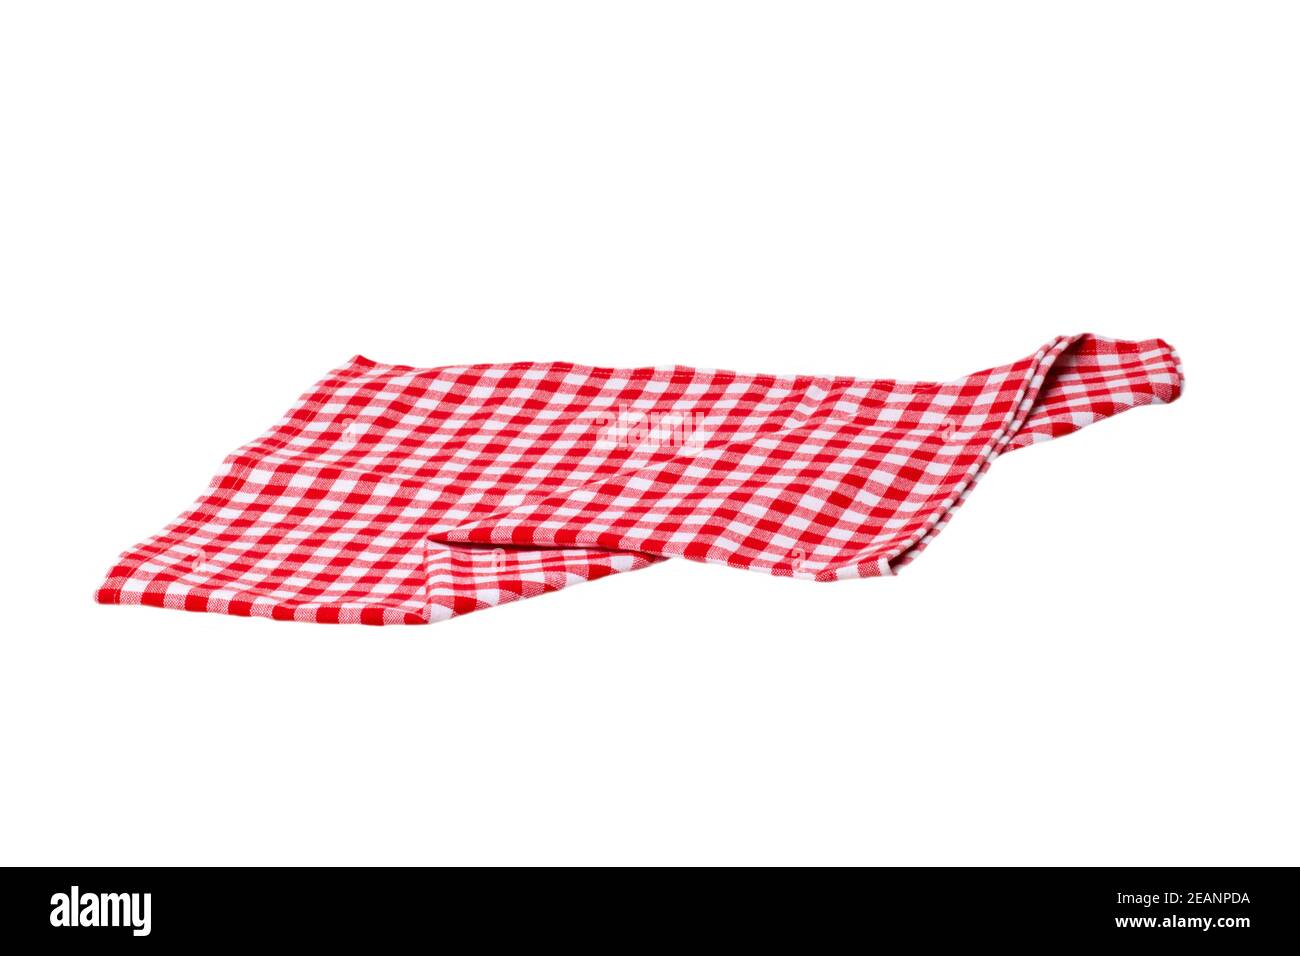 Three New Red Checkered Kitchen Picnic Towels Folded Versus Old